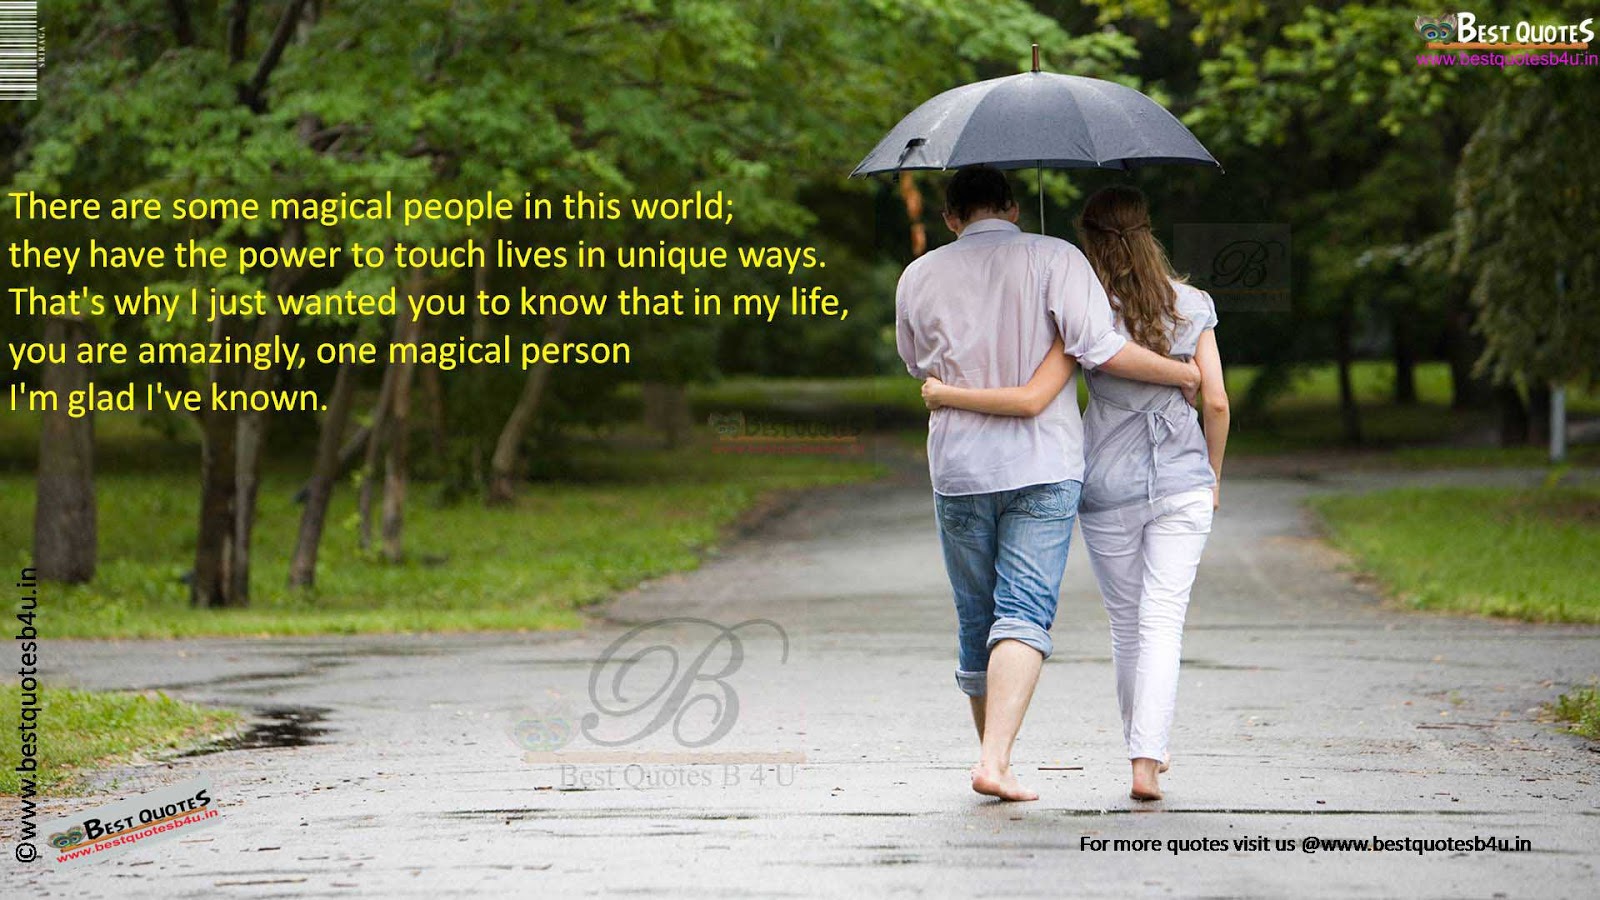 Heart touching Love proposal Quotes Messages wallpapers | Like Share Follow